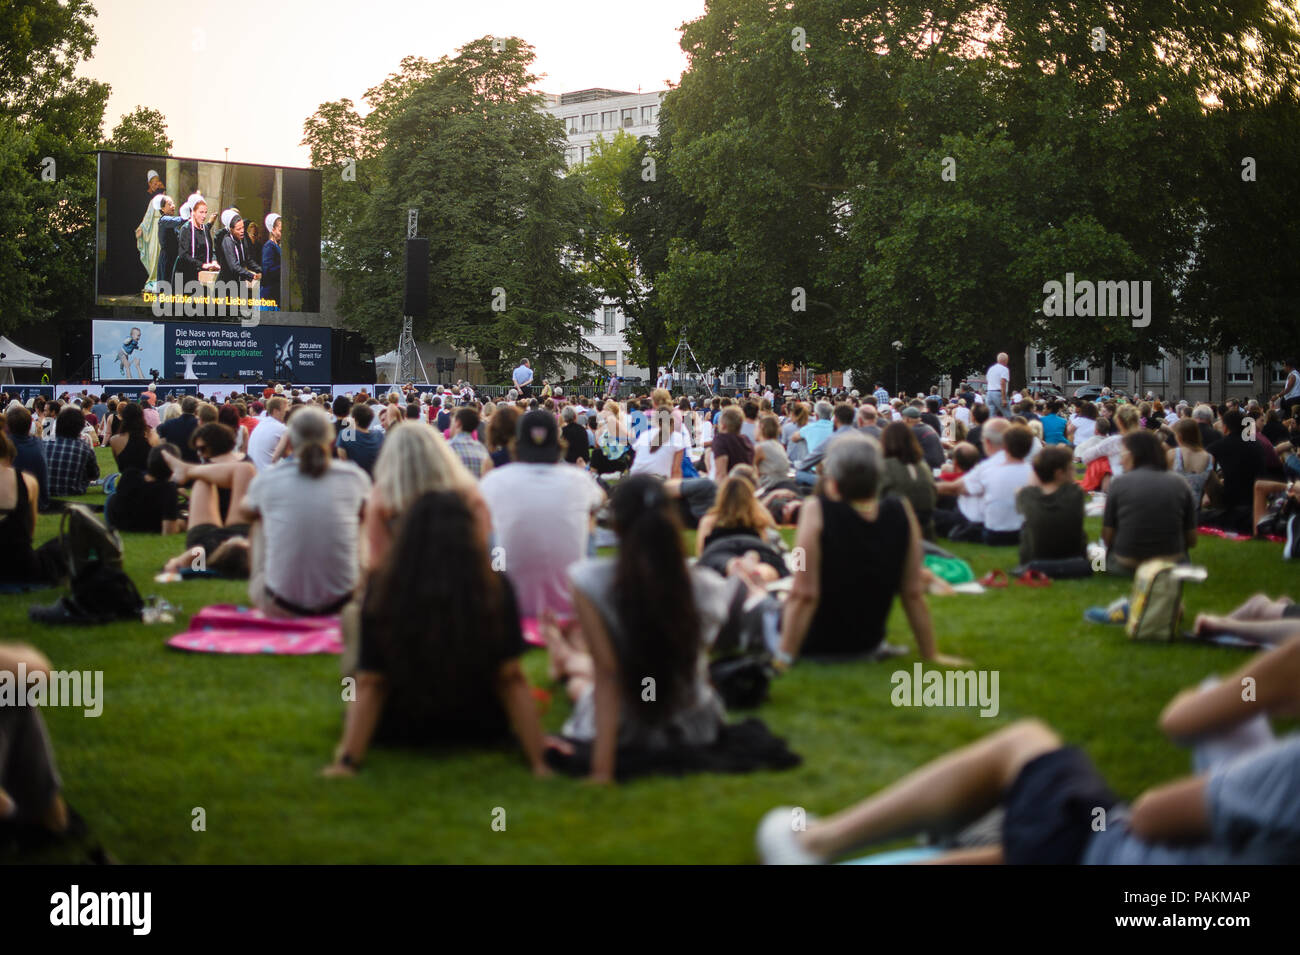 Stuttgart, Germany. 24th July, 2018. Visitors watch a live broadcast of Vincenzo Bellini's "Die Puritaner" (I puritani) from the Stuttgart Opera House during the open-air event "Oper am See" (lit. opera at the lake). Credit: Sebastian Gollnow/dpa/Alamy Live News Stock Photo